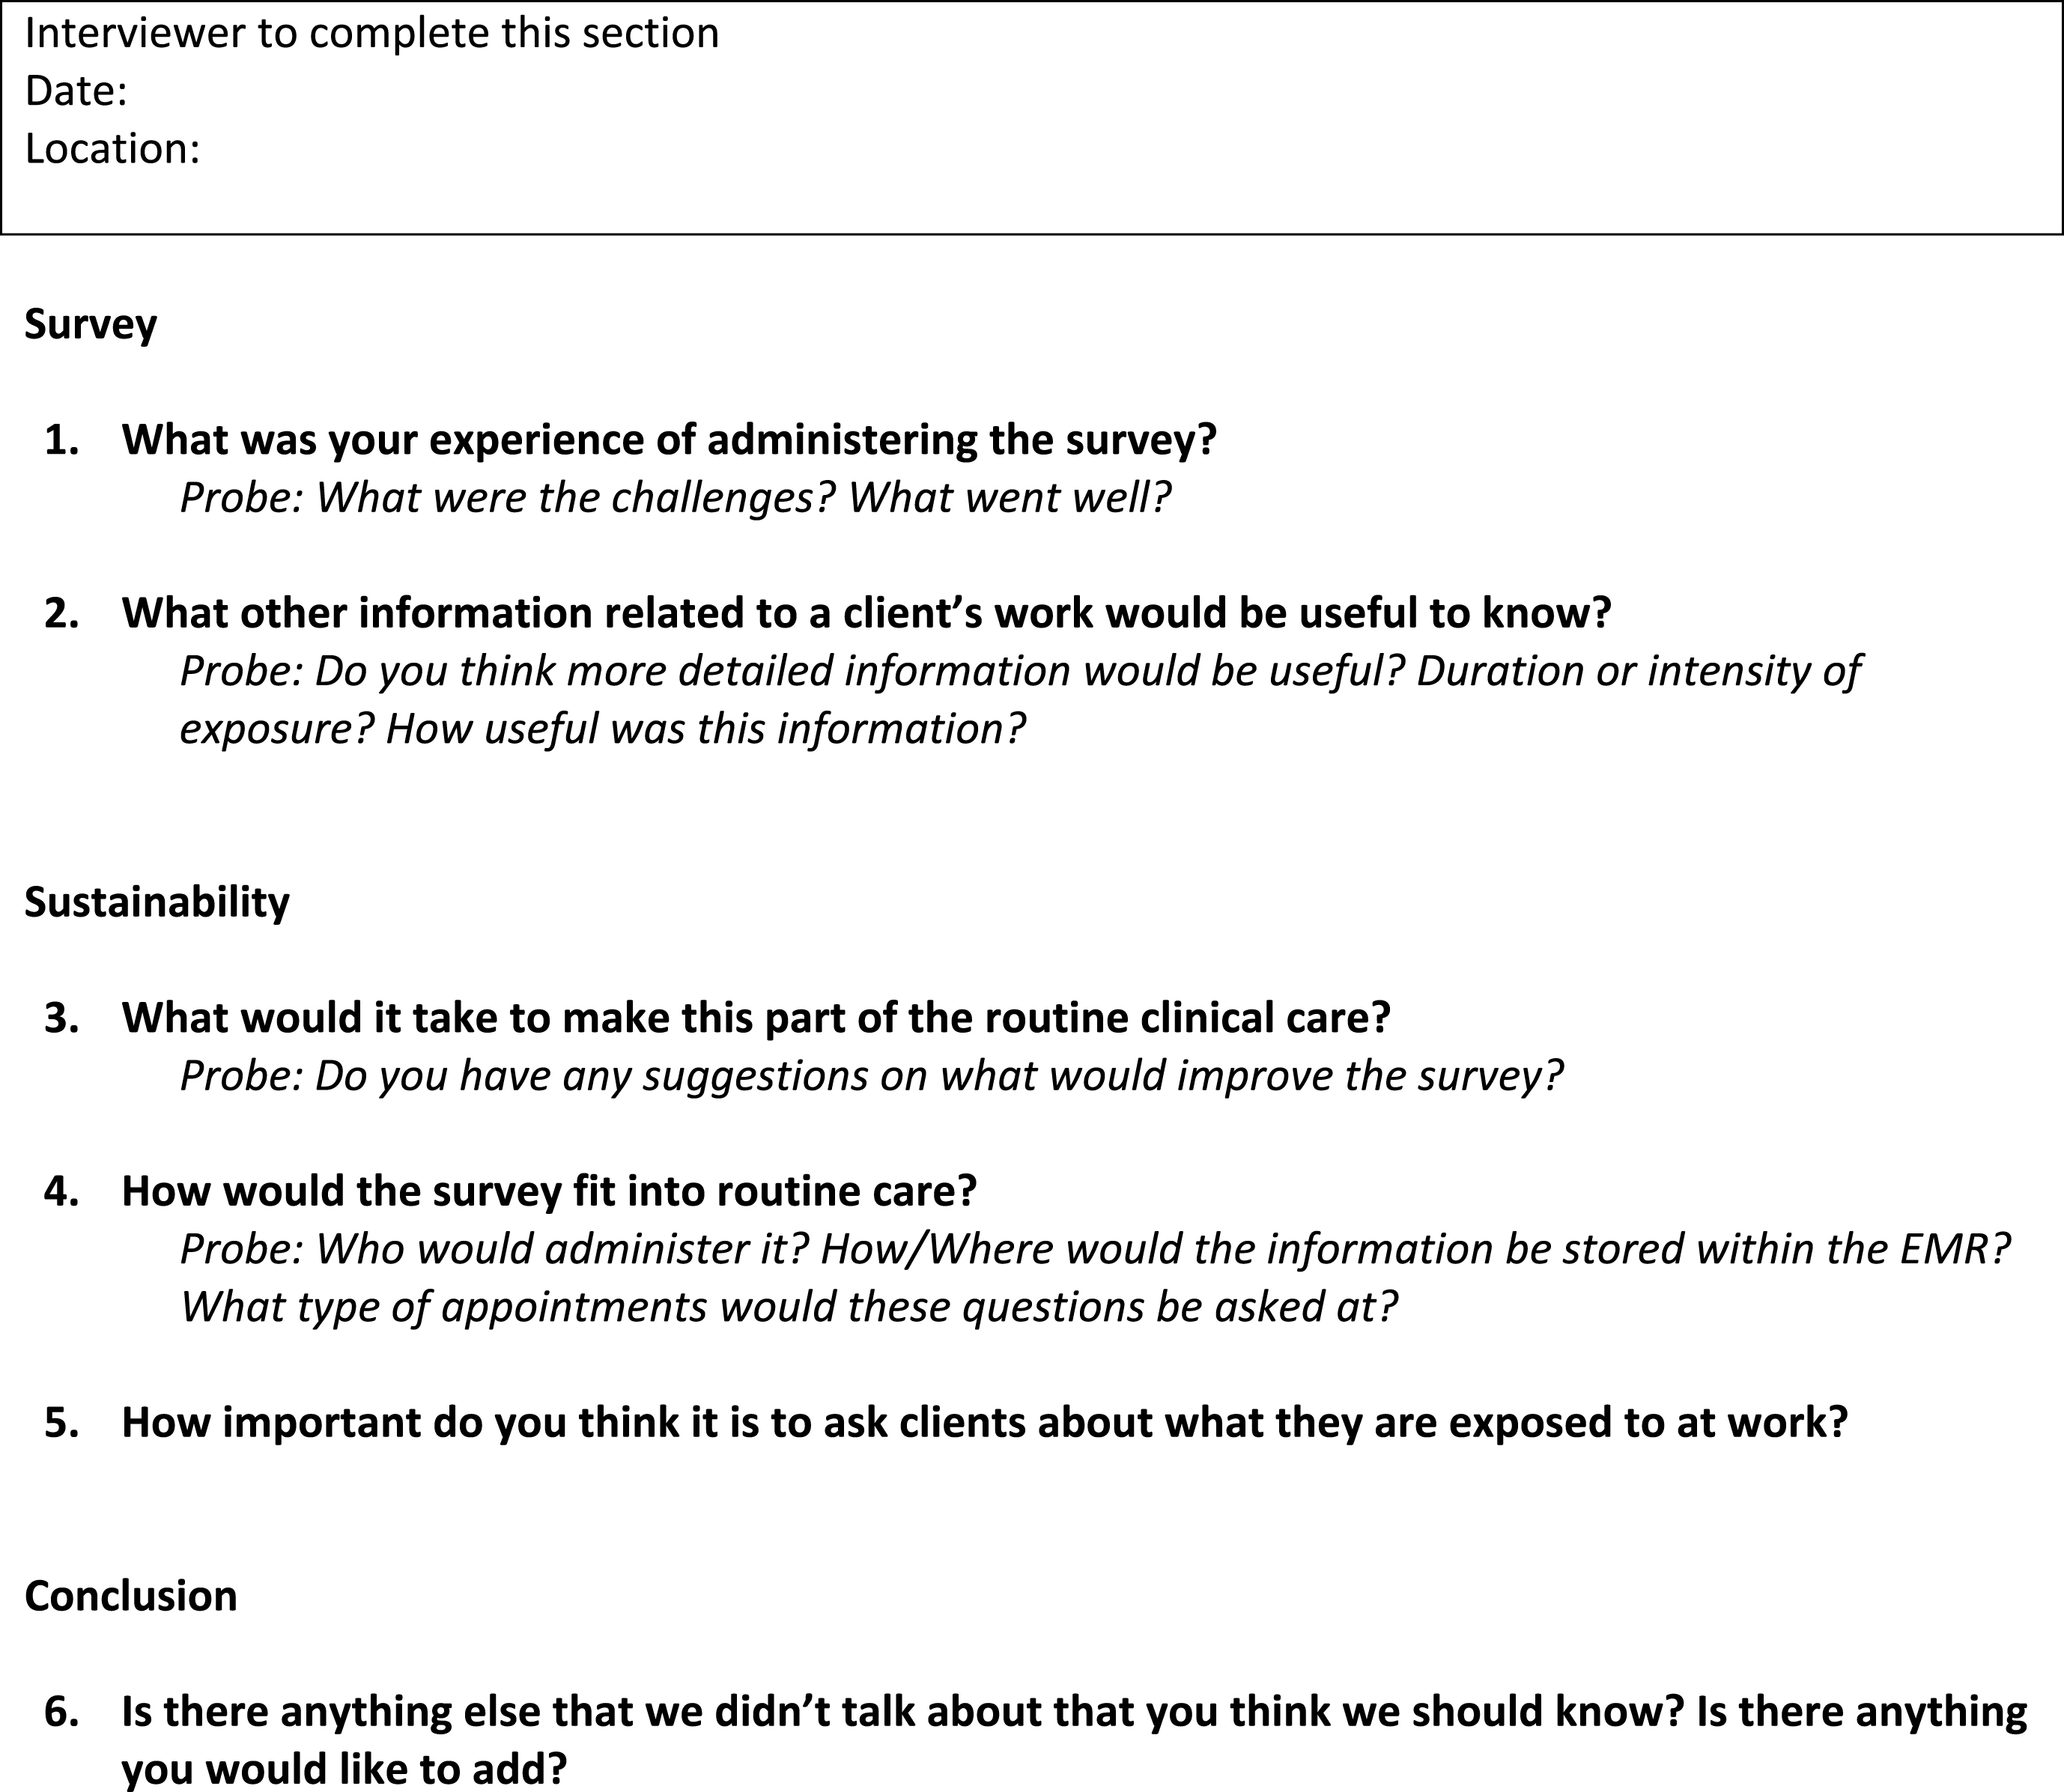 Example Interview Guide: Providers Administering Survey.